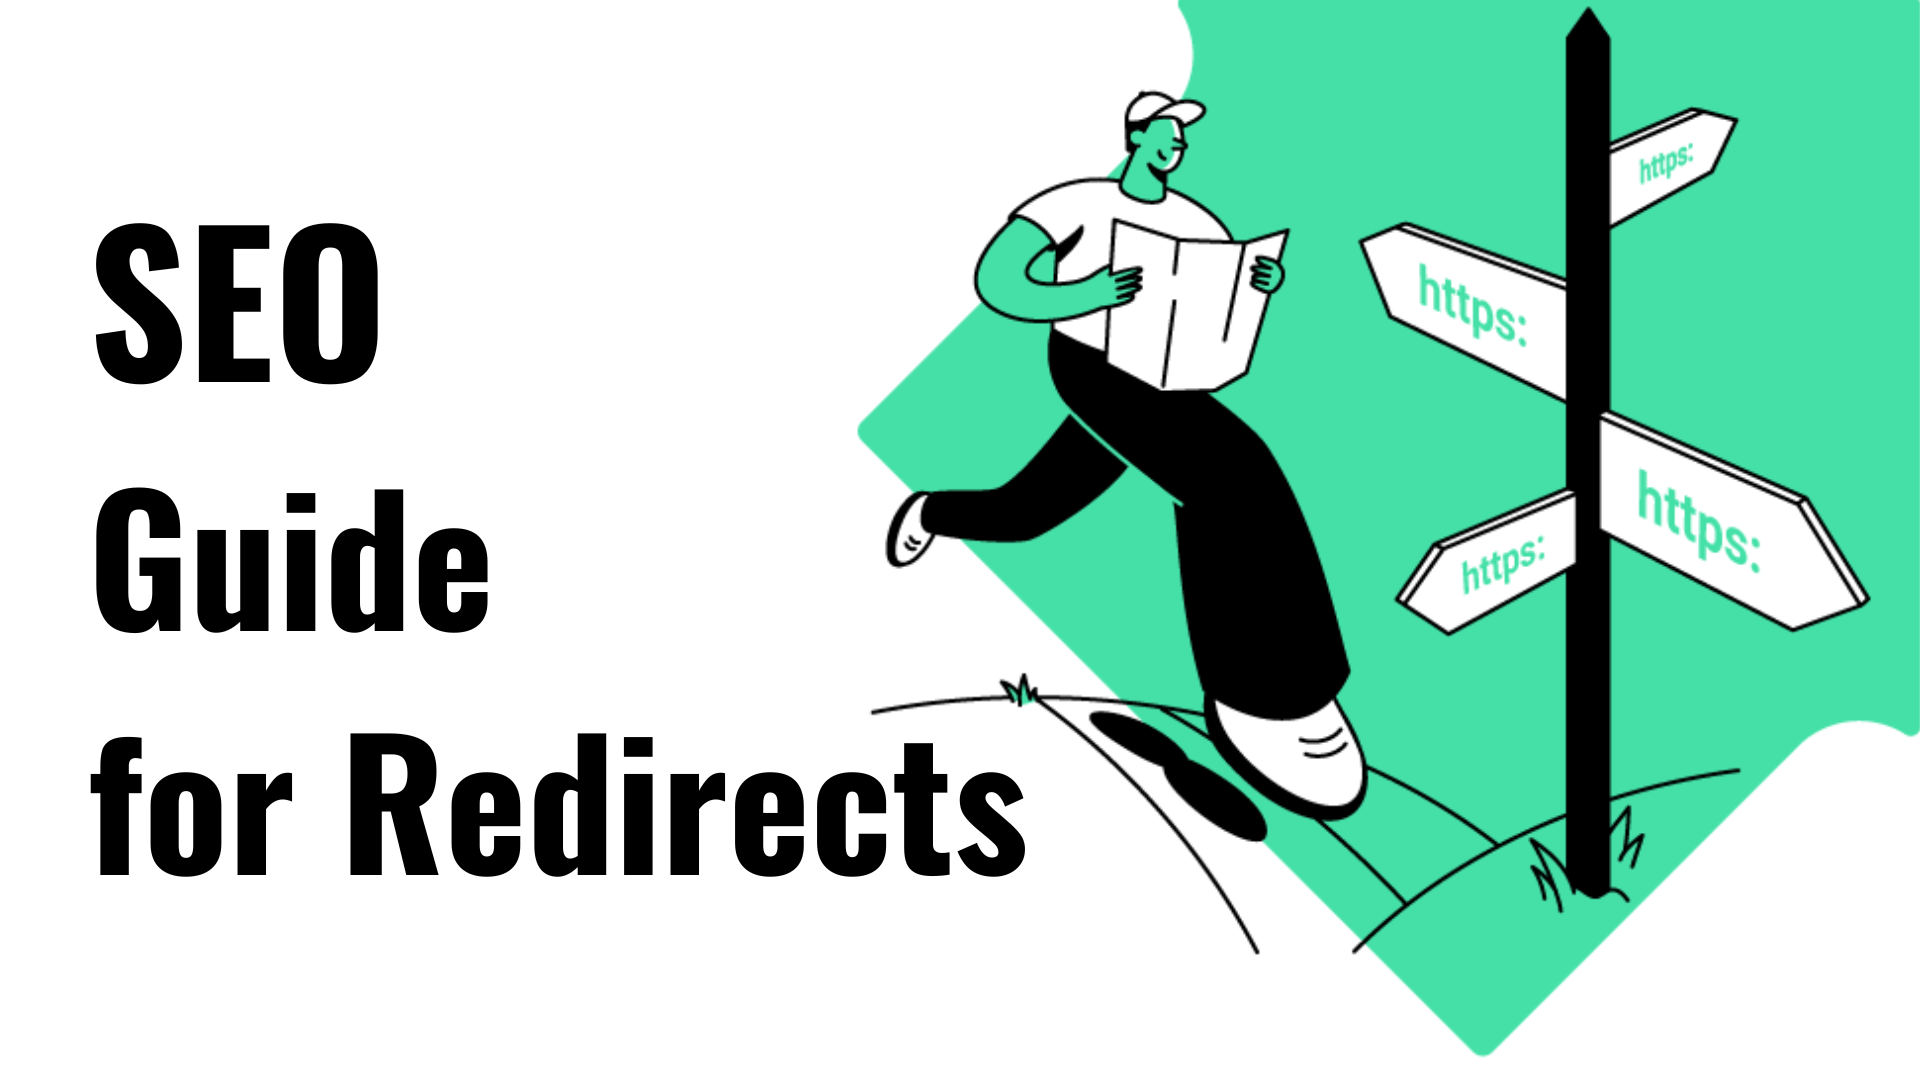 SEO Guide for Redirects